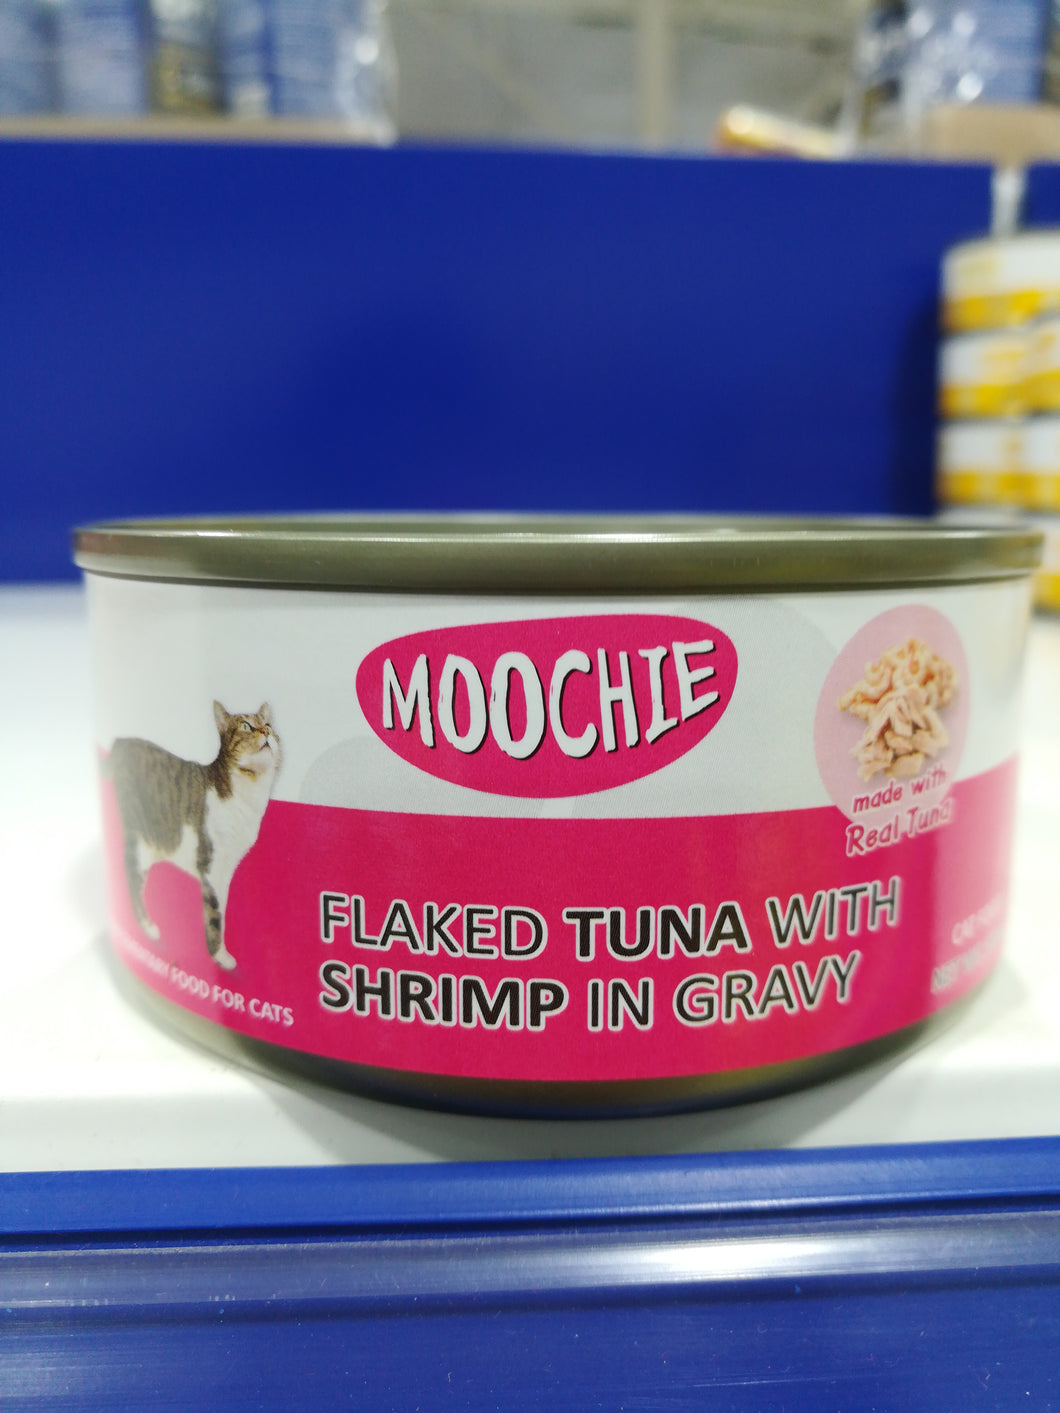 Moochie Flaked Tuna With Shrimp In Gravy